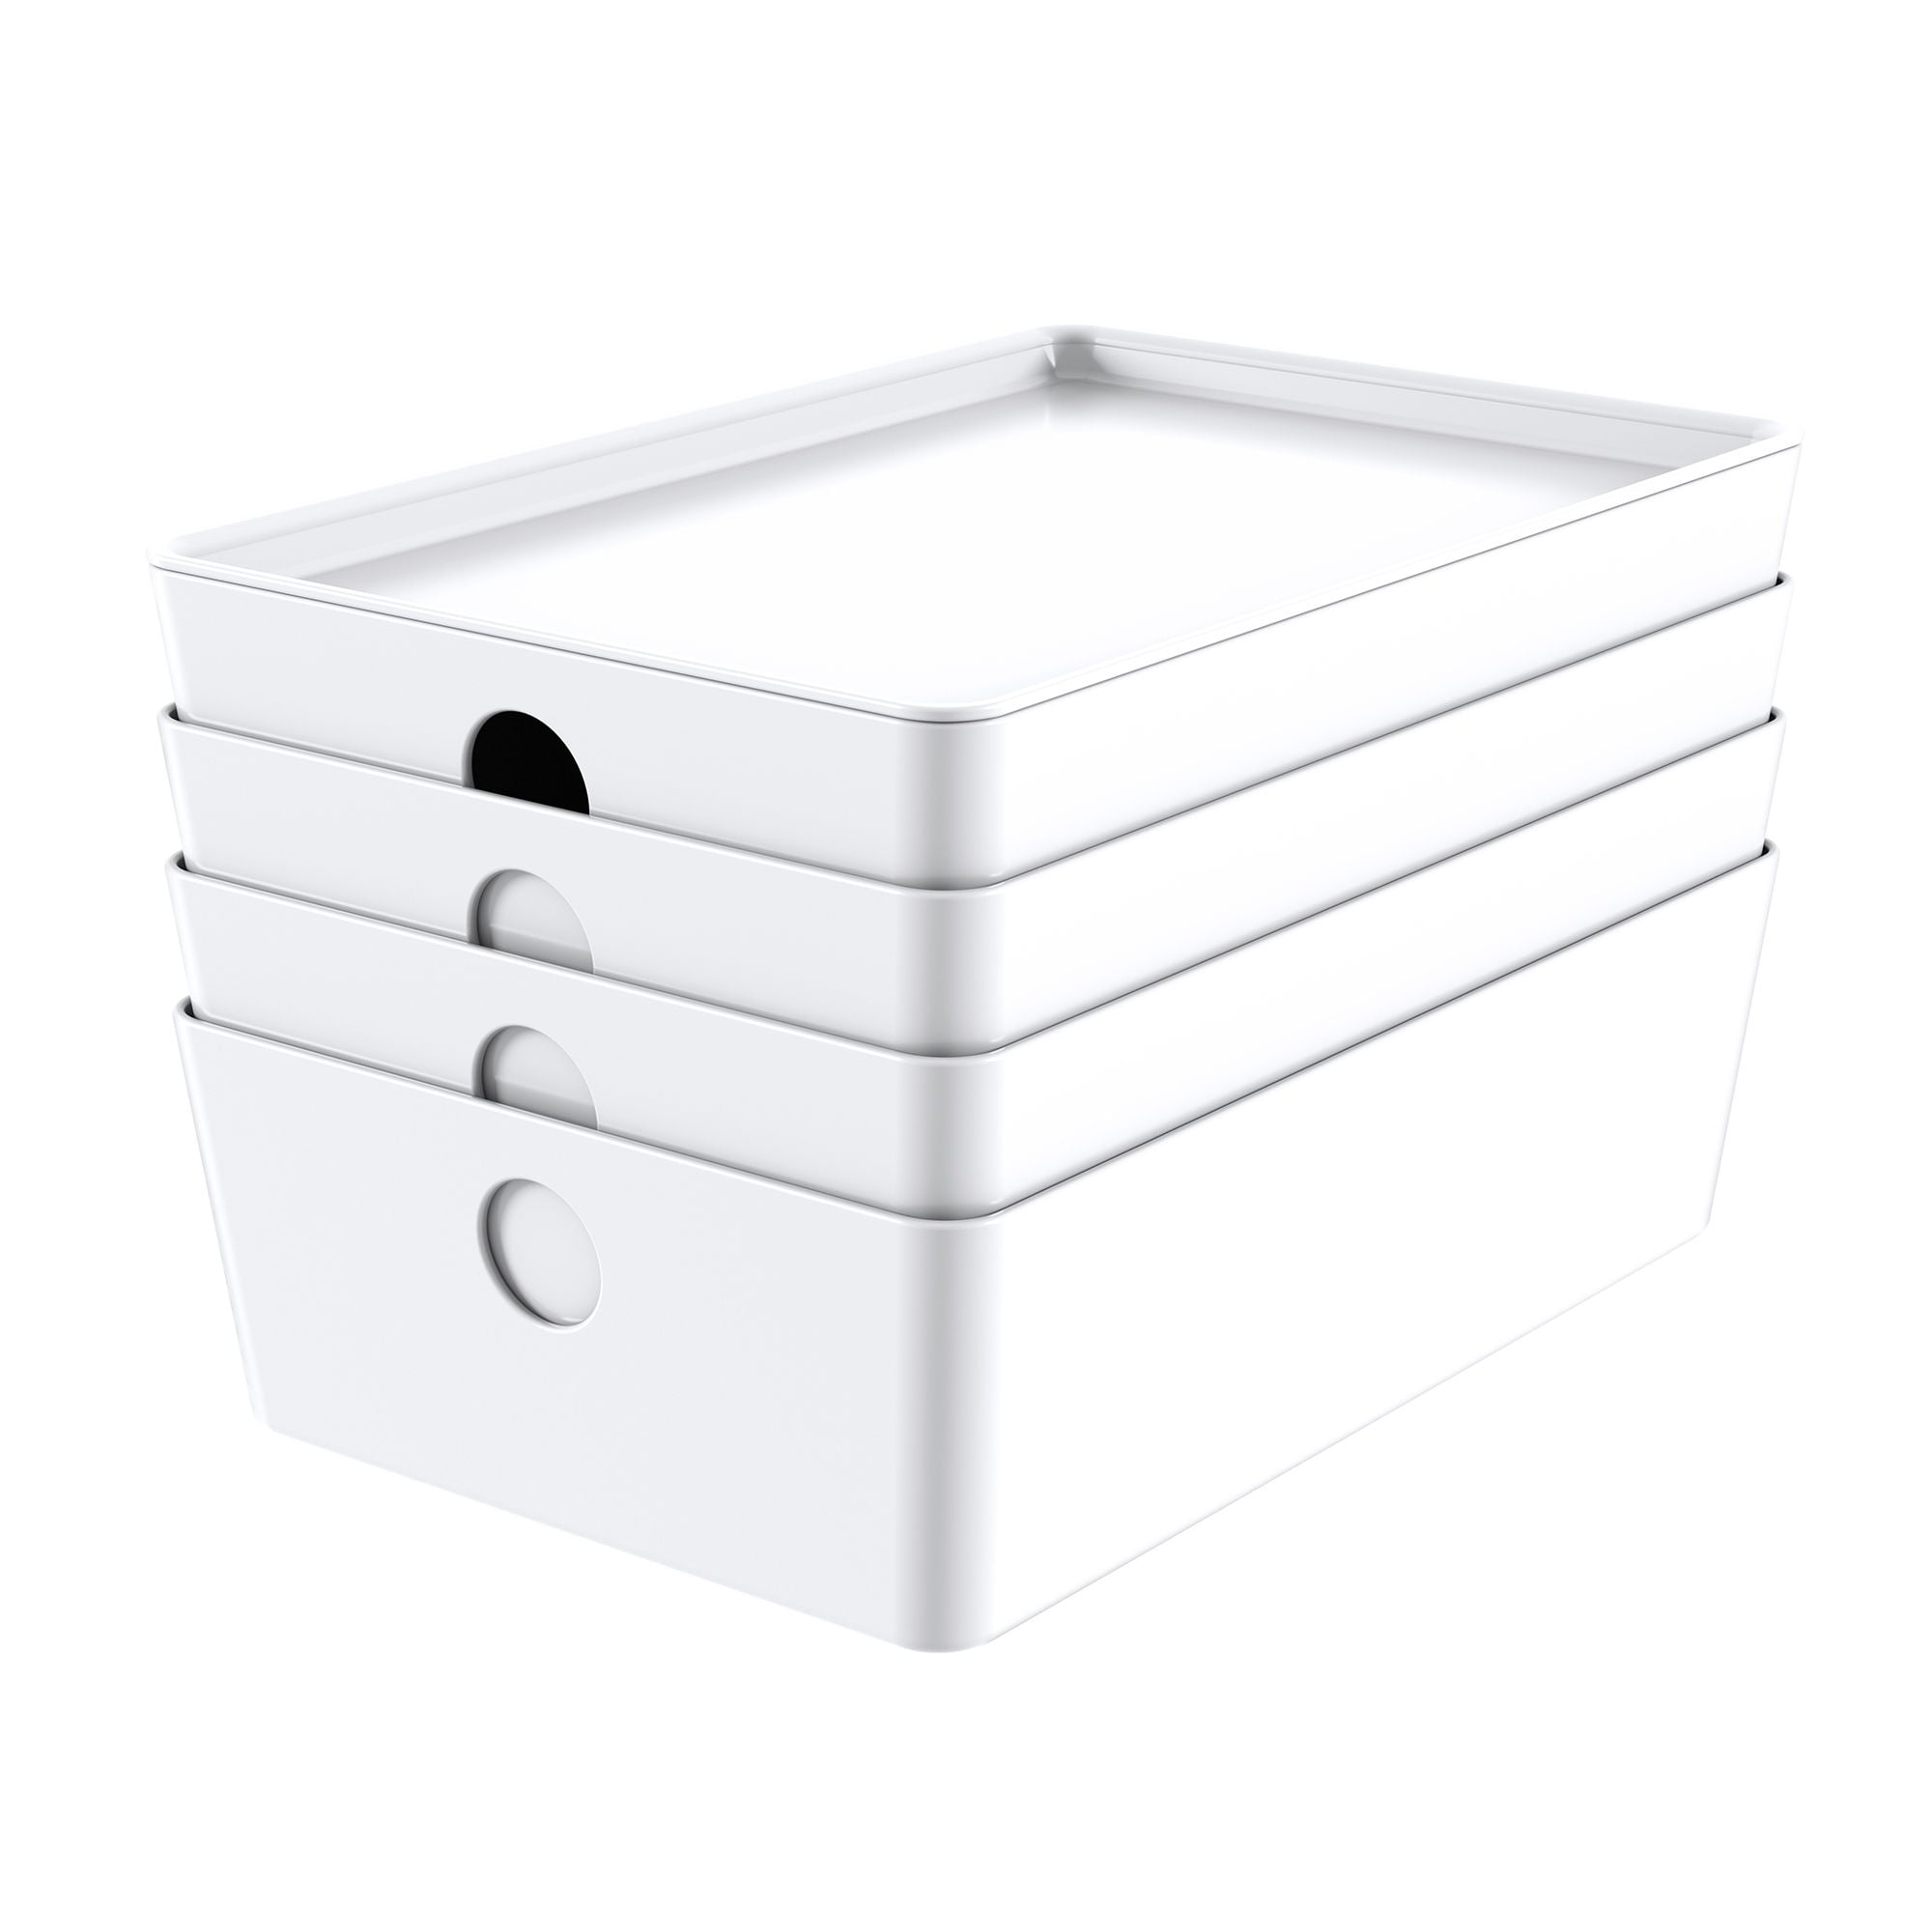 Set of 4 Plastic Storage Boxes with Lids in White